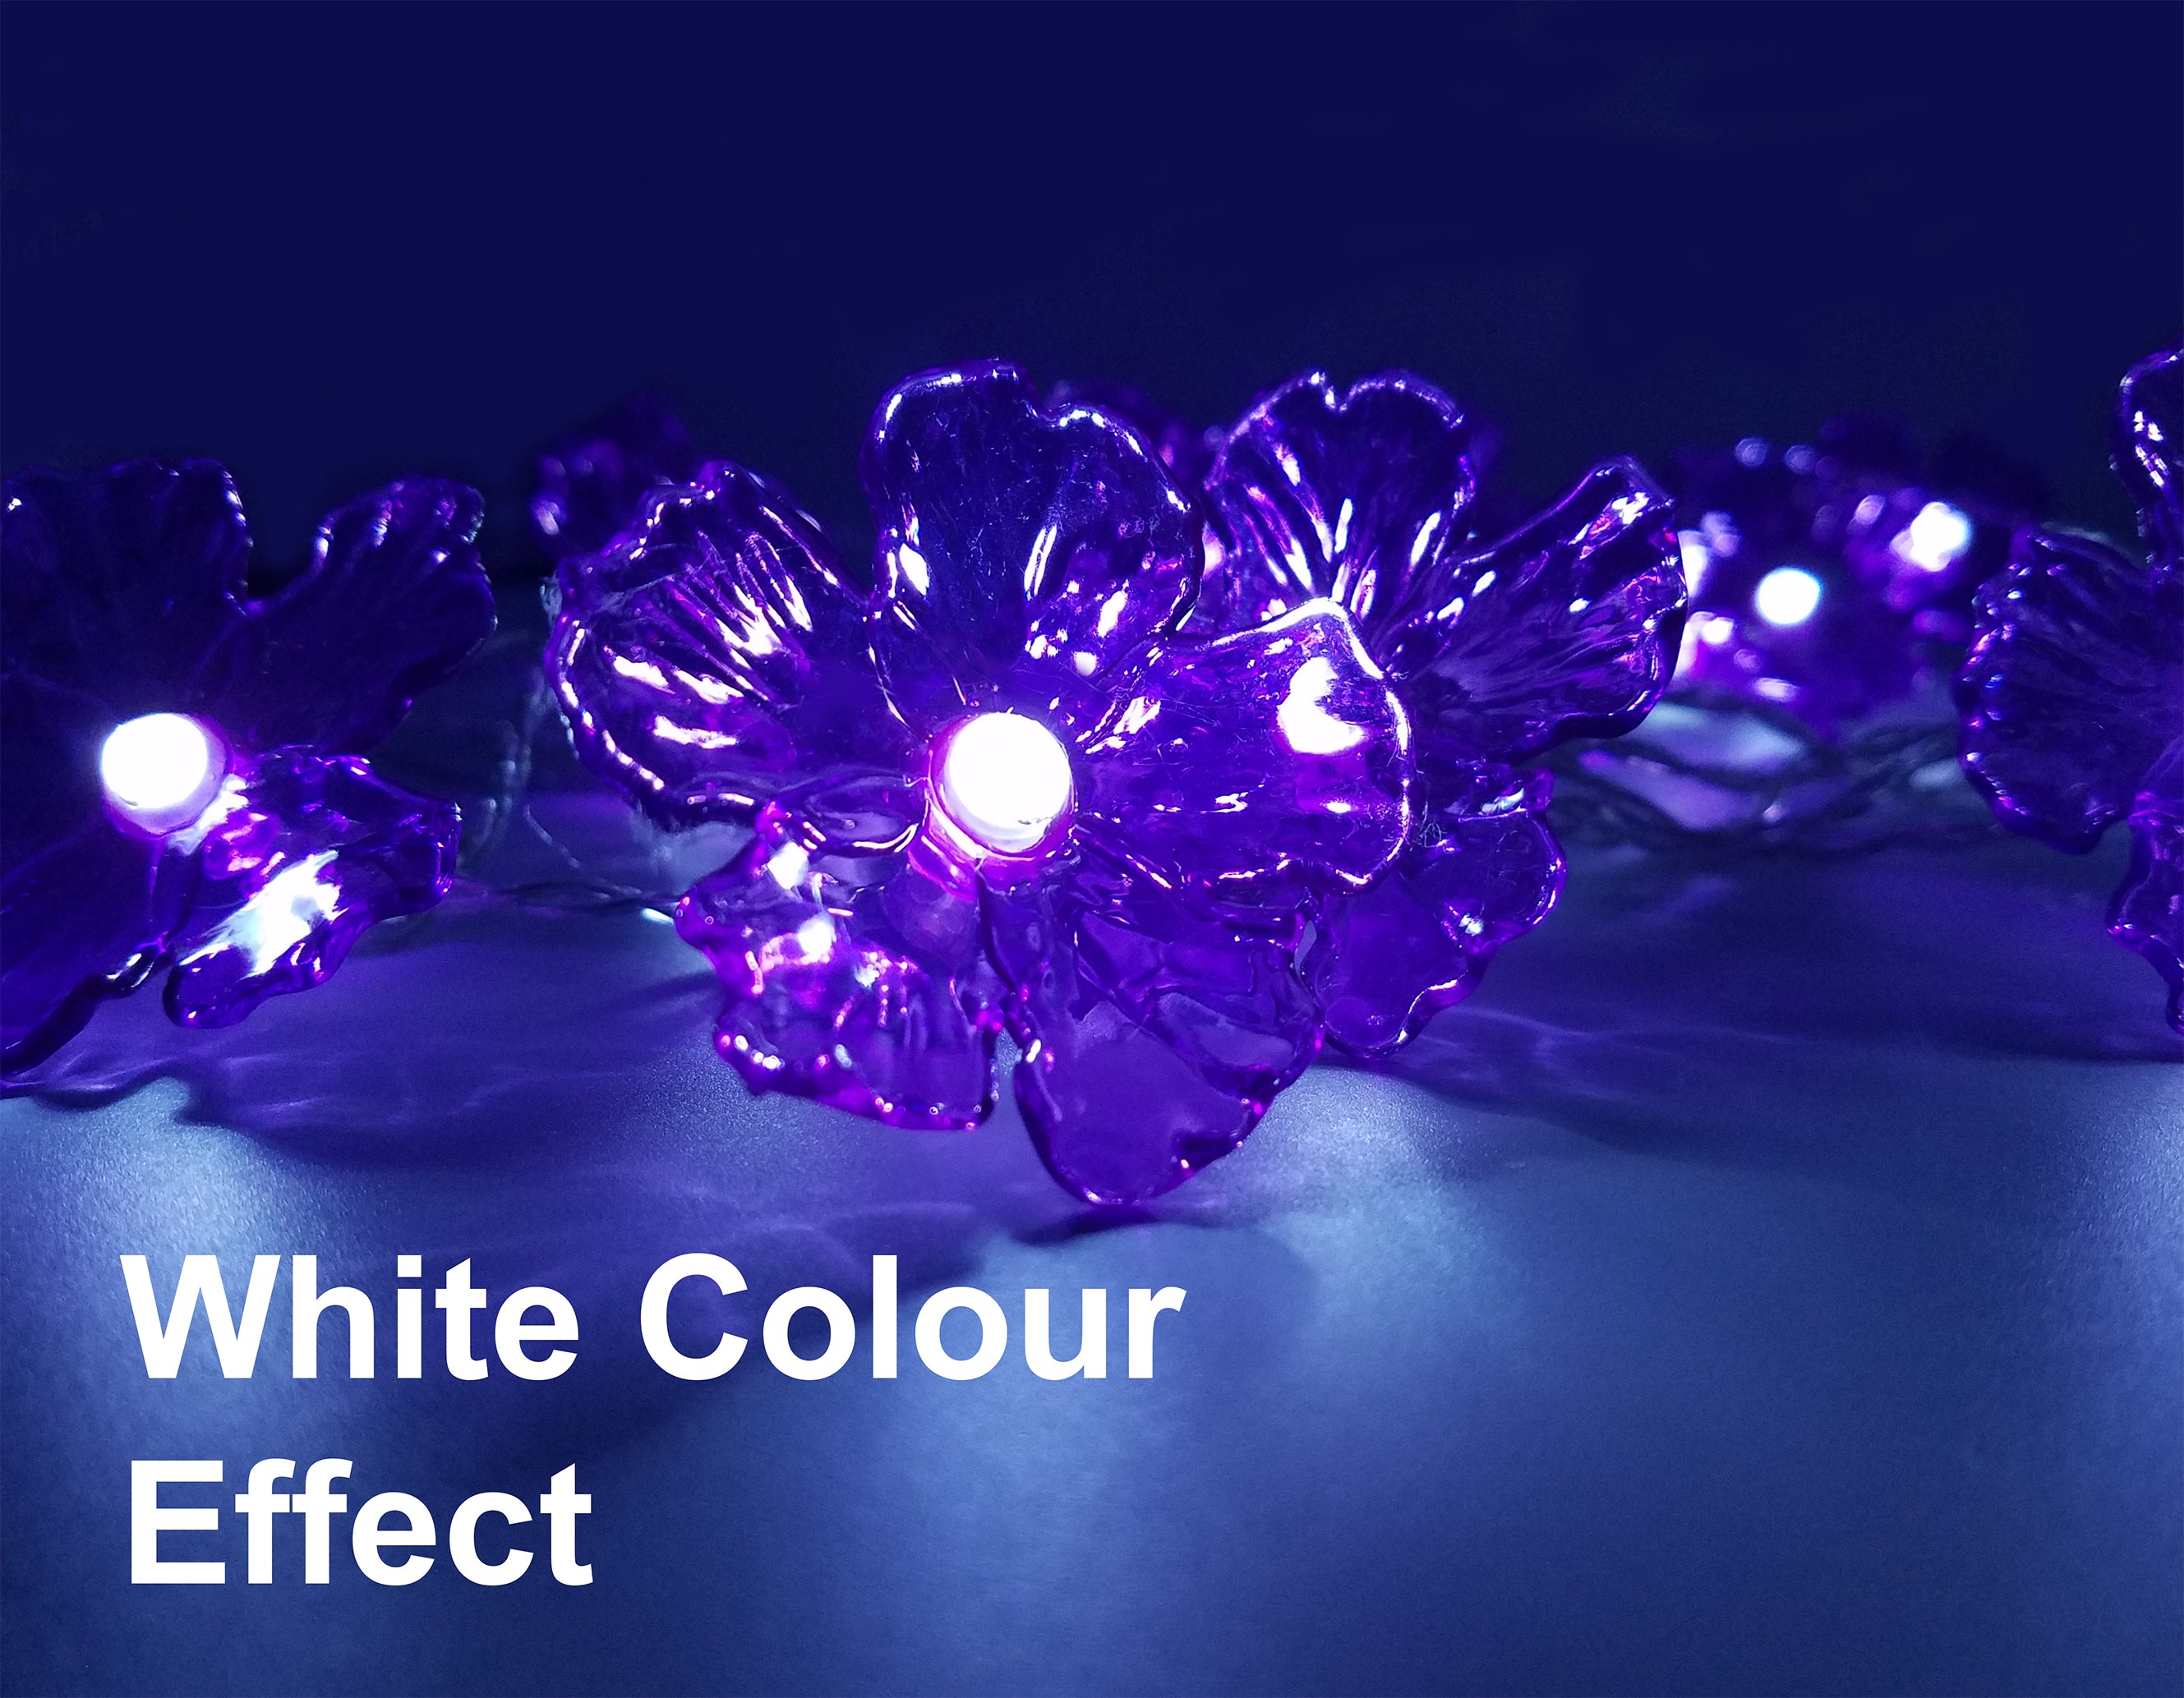 FluxTech - Matthiola Flower 20 x Dual Colour LED String Lights by JustLED – Multi-function Effect – Timer function - Battery Operated